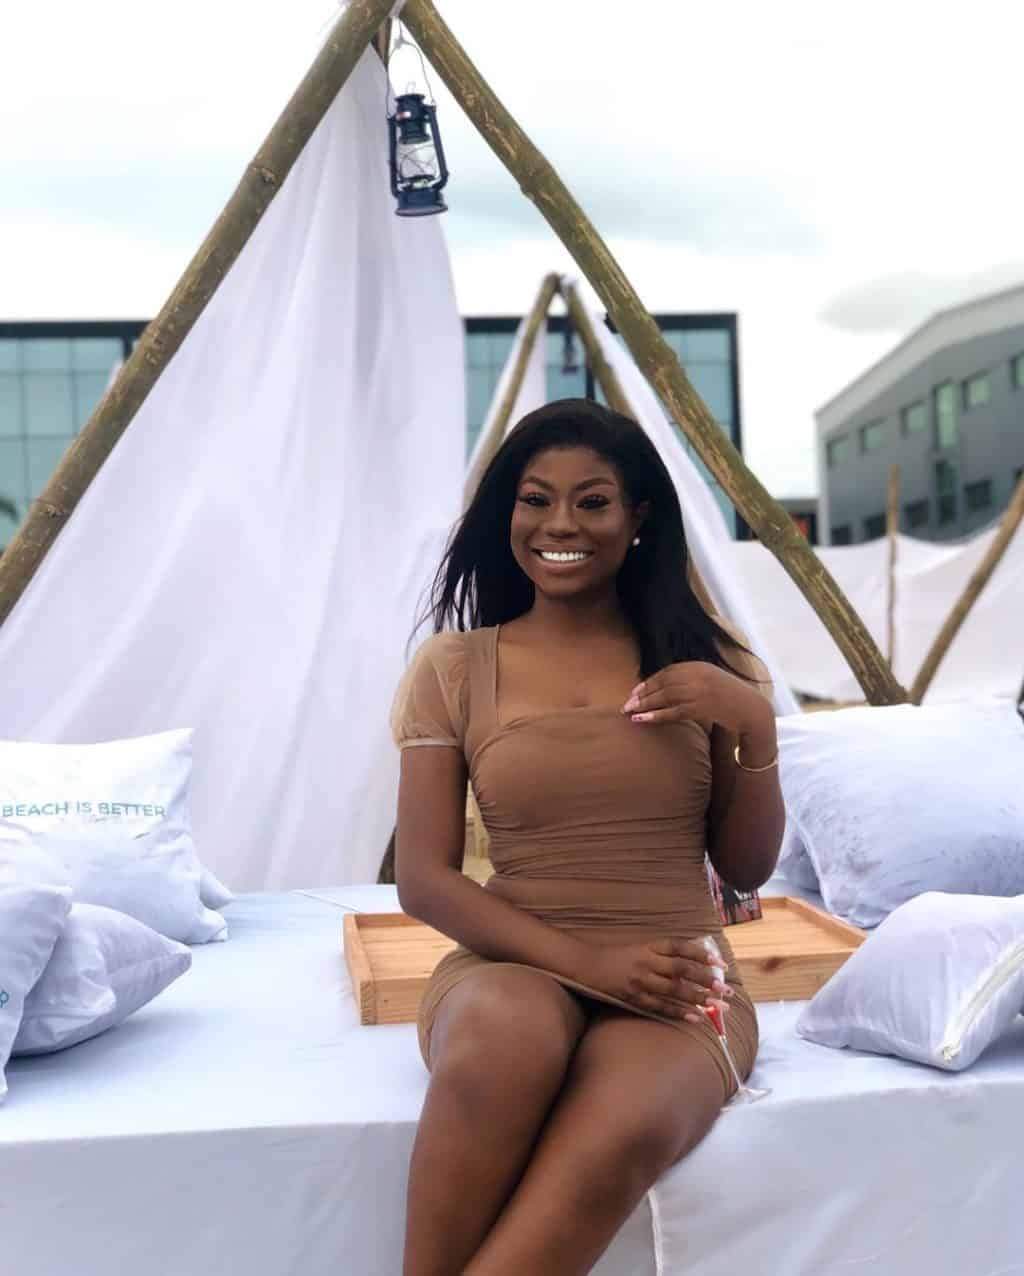 Sophia Momodu all smiles in new photos after Davido welcomed a son